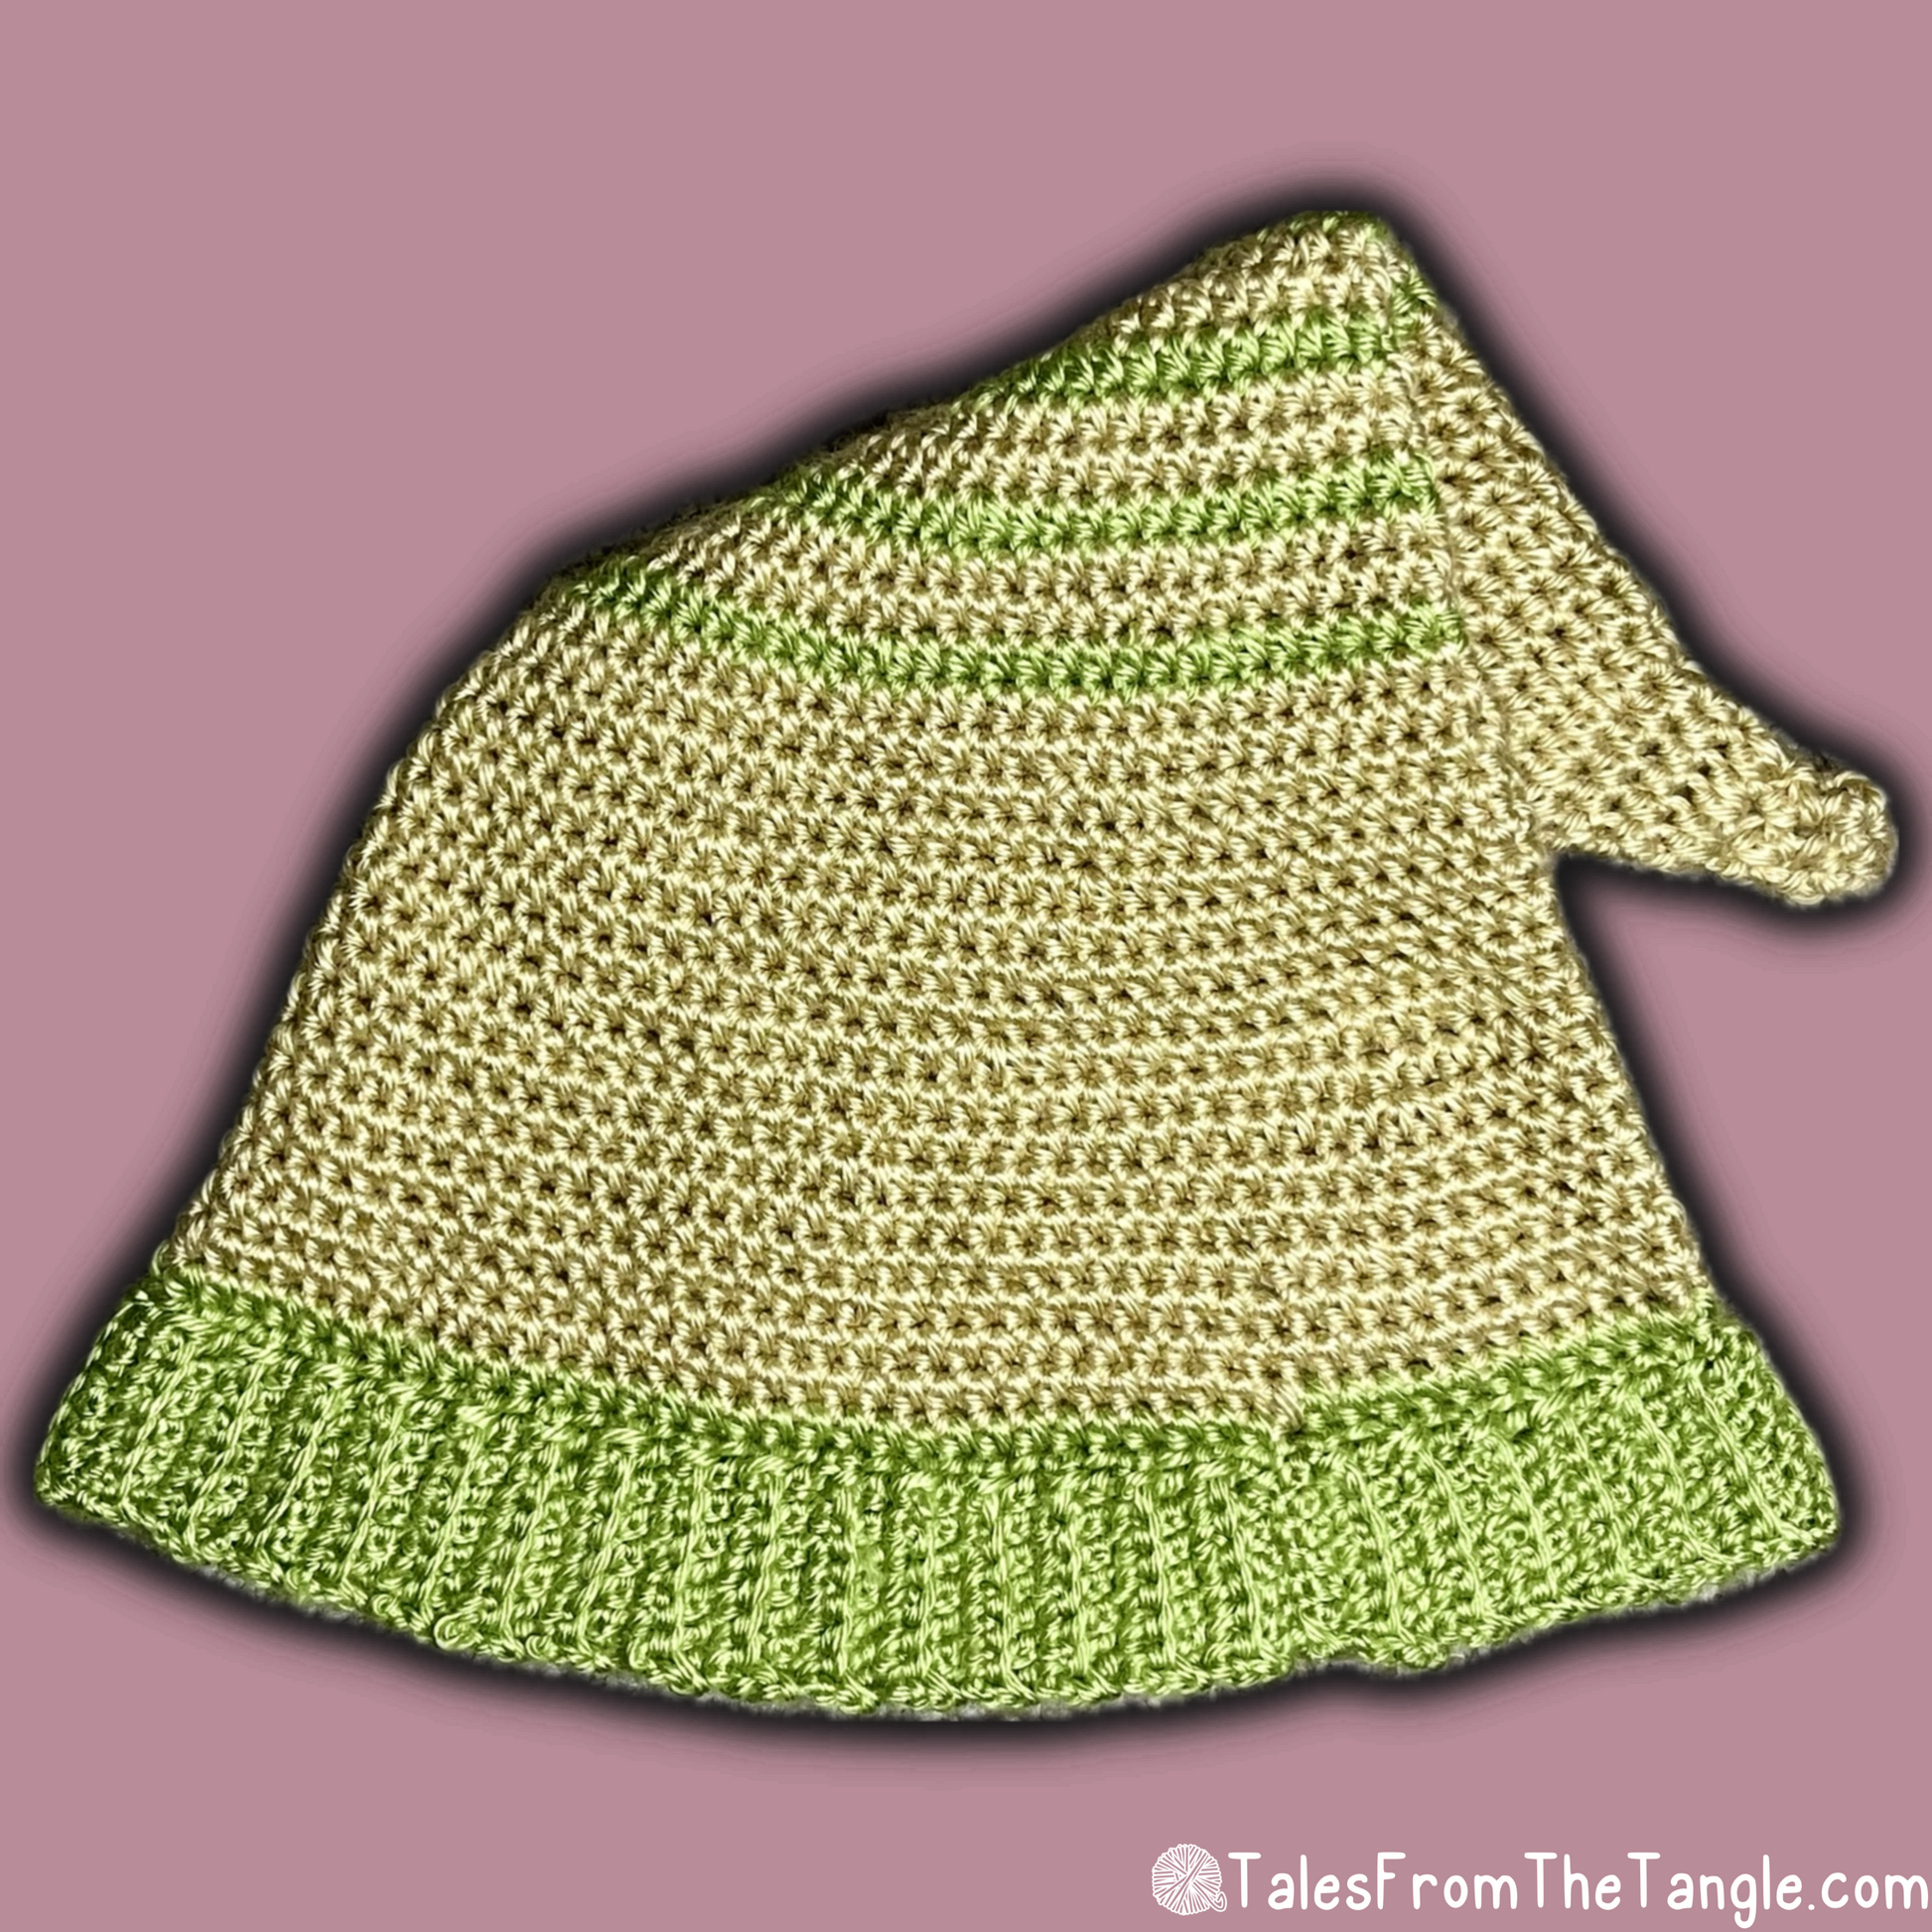 Tan and Green Striped Elf Beanie - Tales from the Tangle